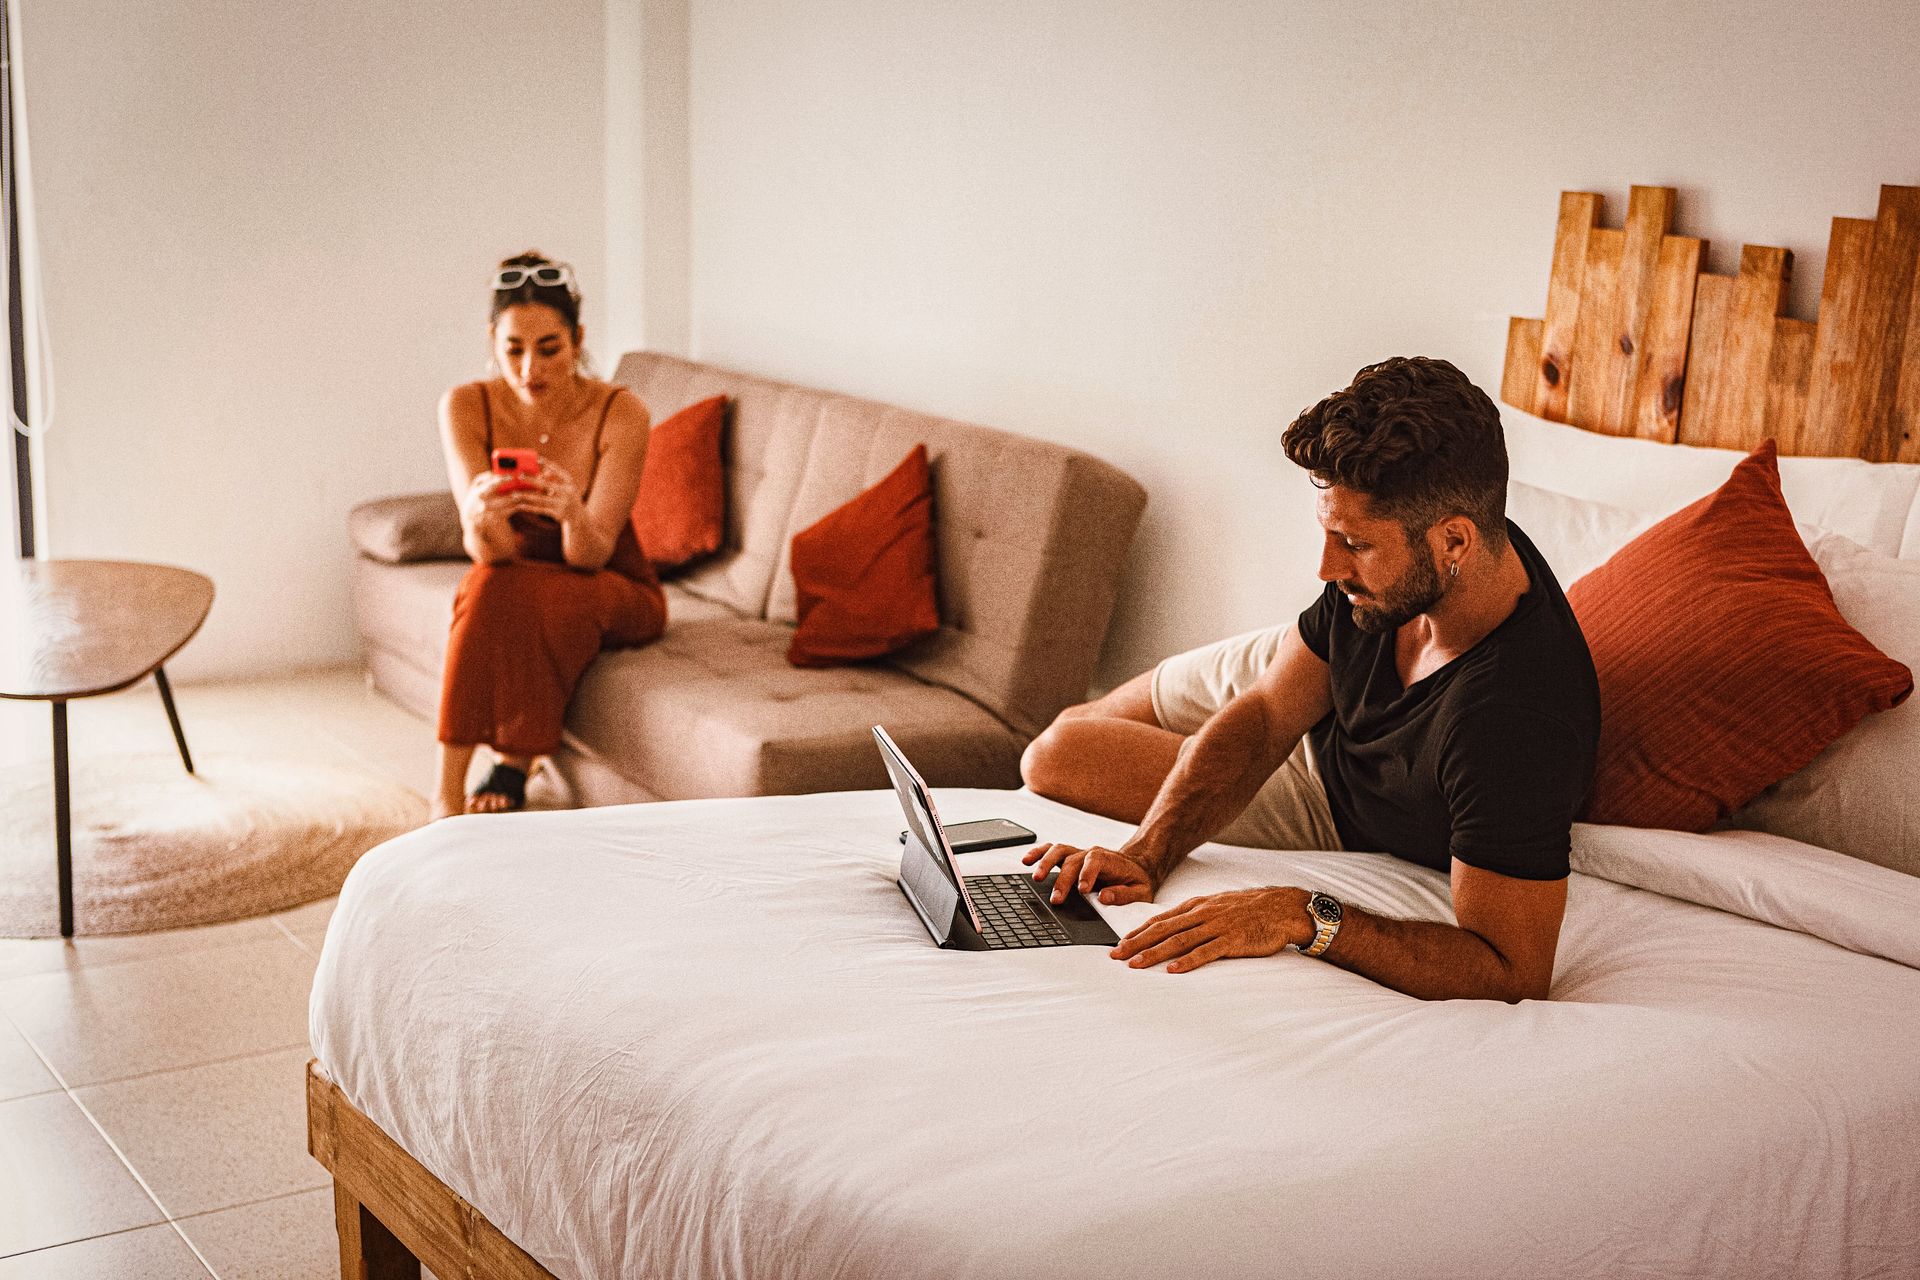 A man is sitting on a bed with a laptop and a woman is sitting on a couch.